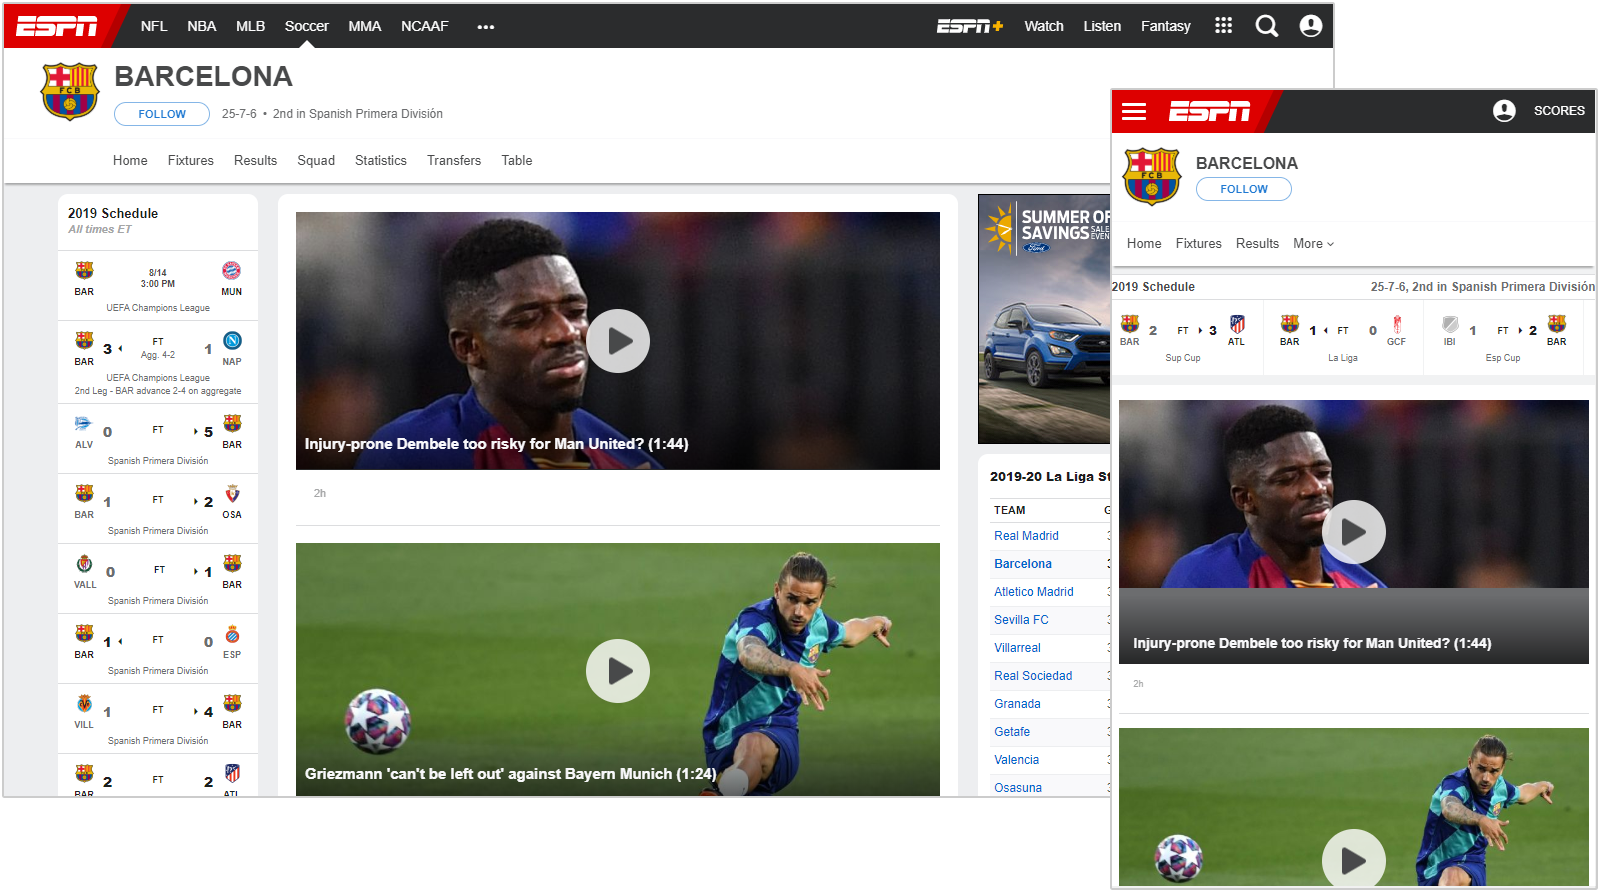 ESPN layout adjusts to support desktop and mobile users